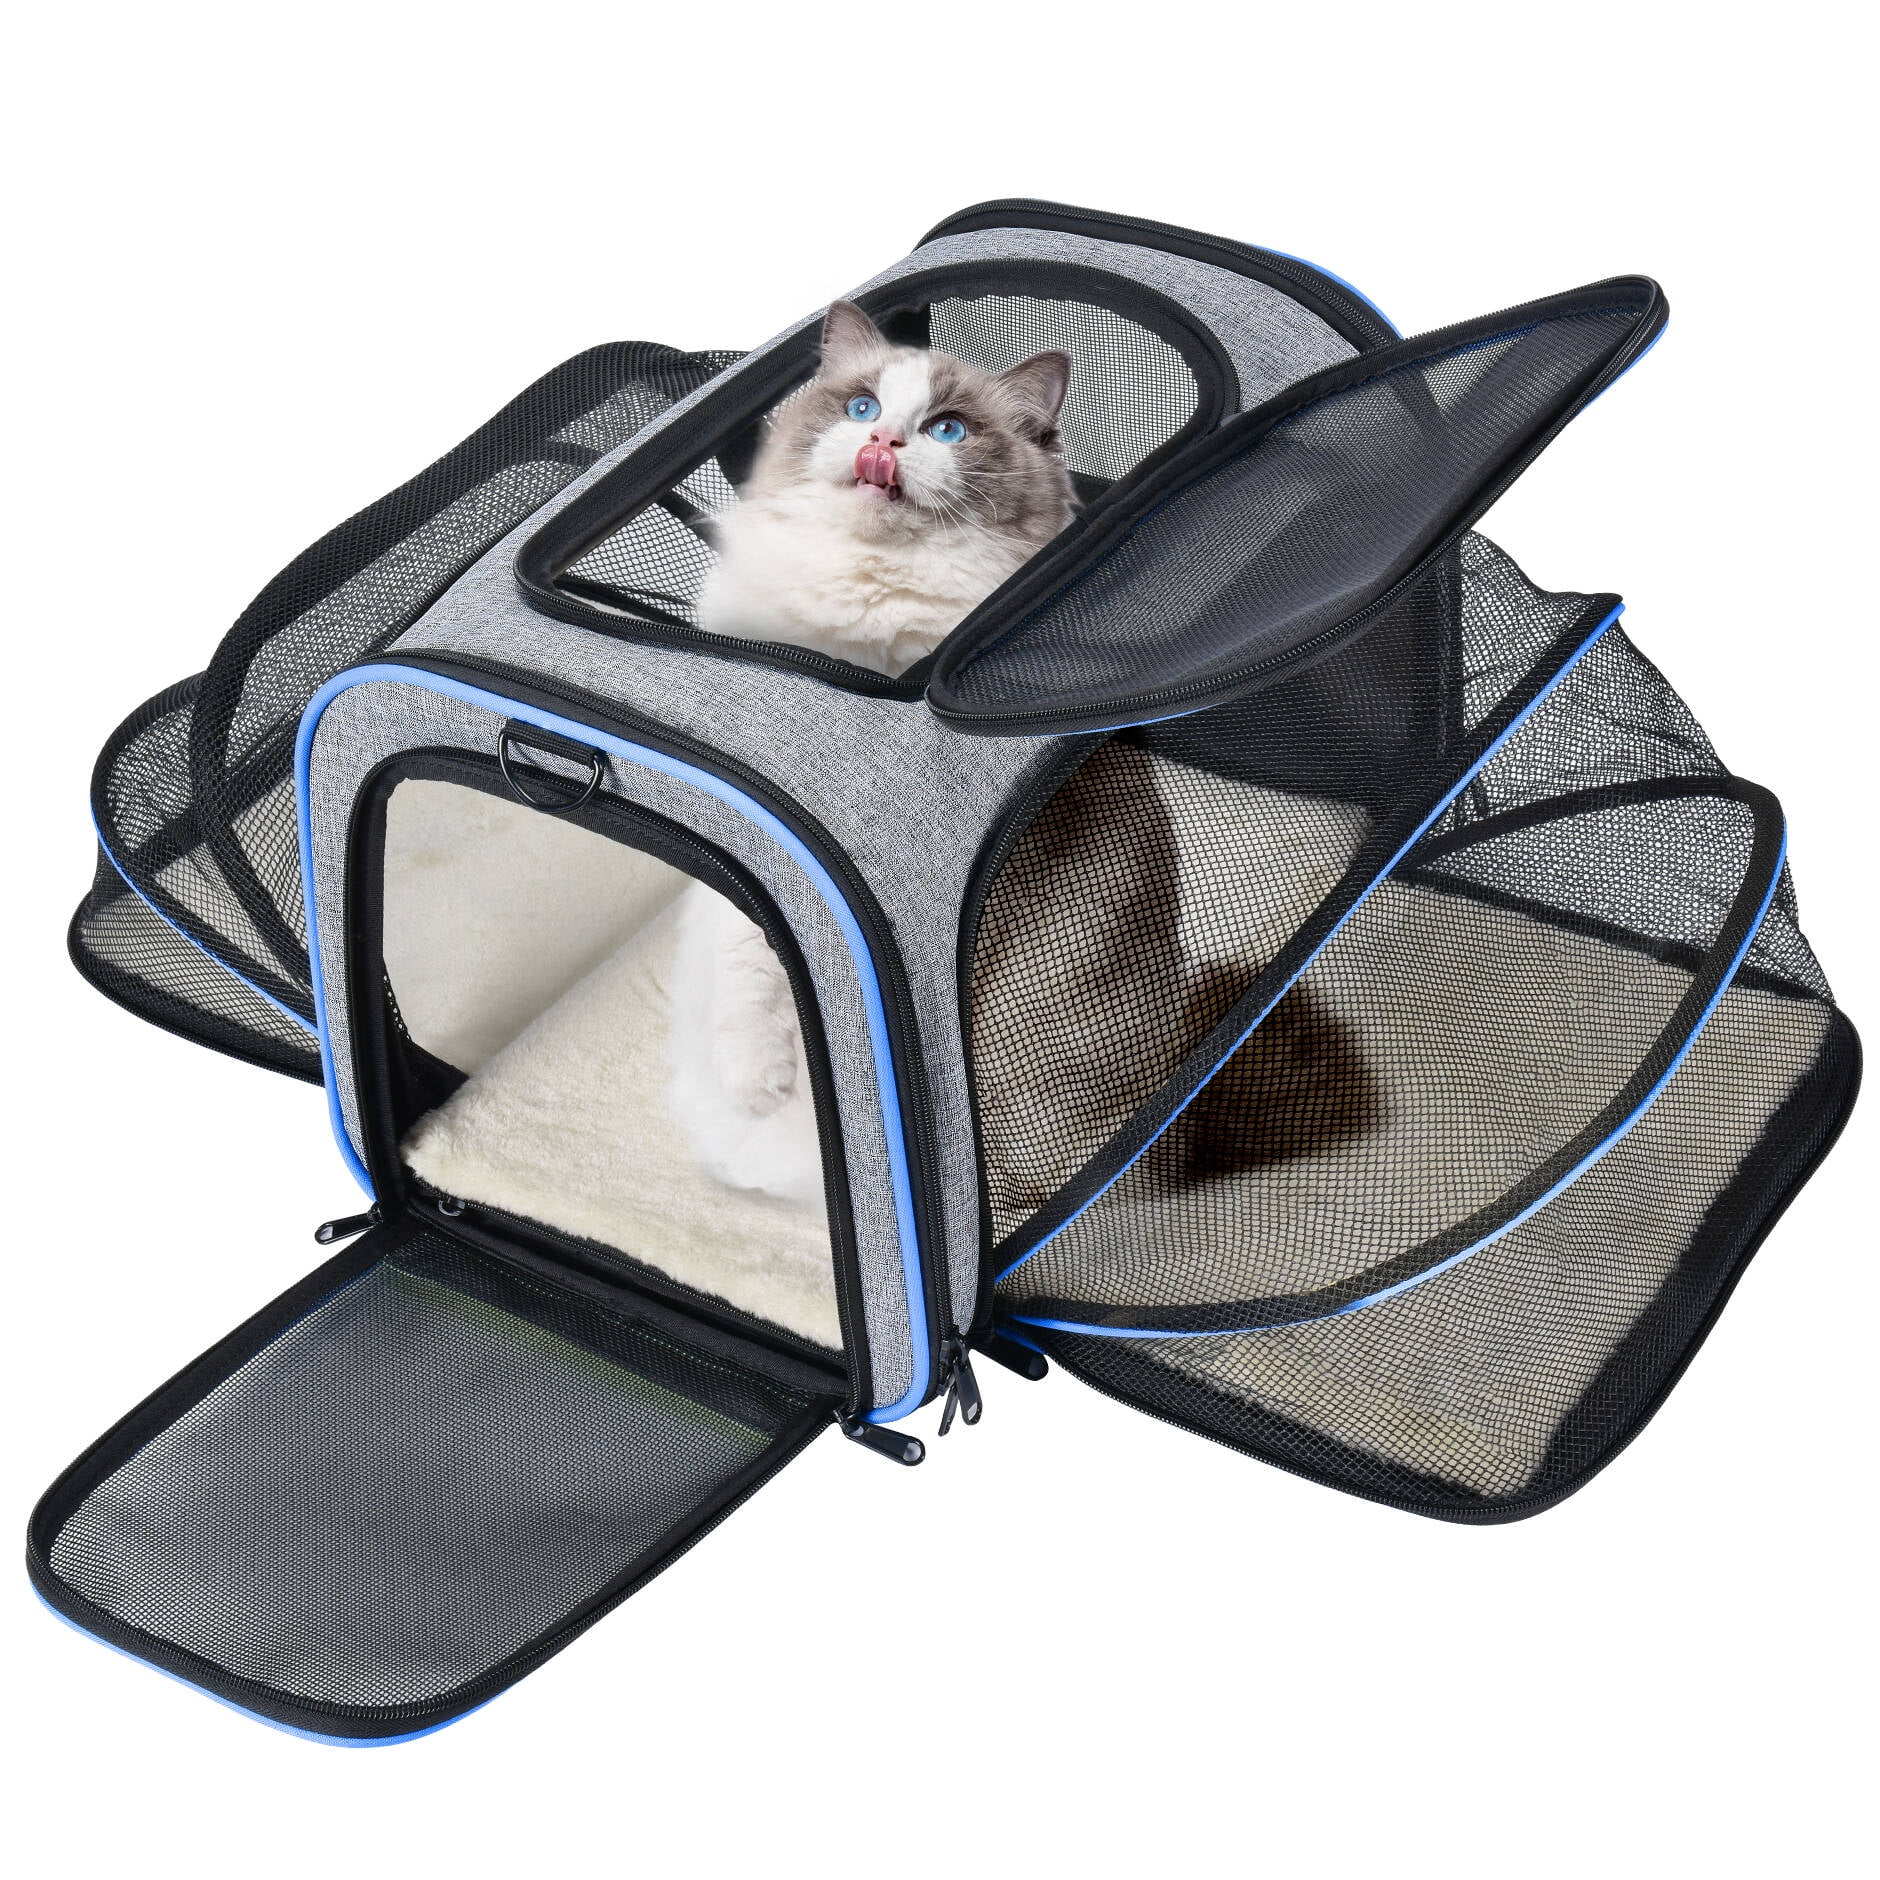 Litake Airline Approved Pet Carrier,4 Sides Expandable Carrier Bag with  Fleece Pad,Portable Pet Travel Carrier Car Train Travel TSA Soft Sided  Collapsible Dog Carrier for 2 Cats 